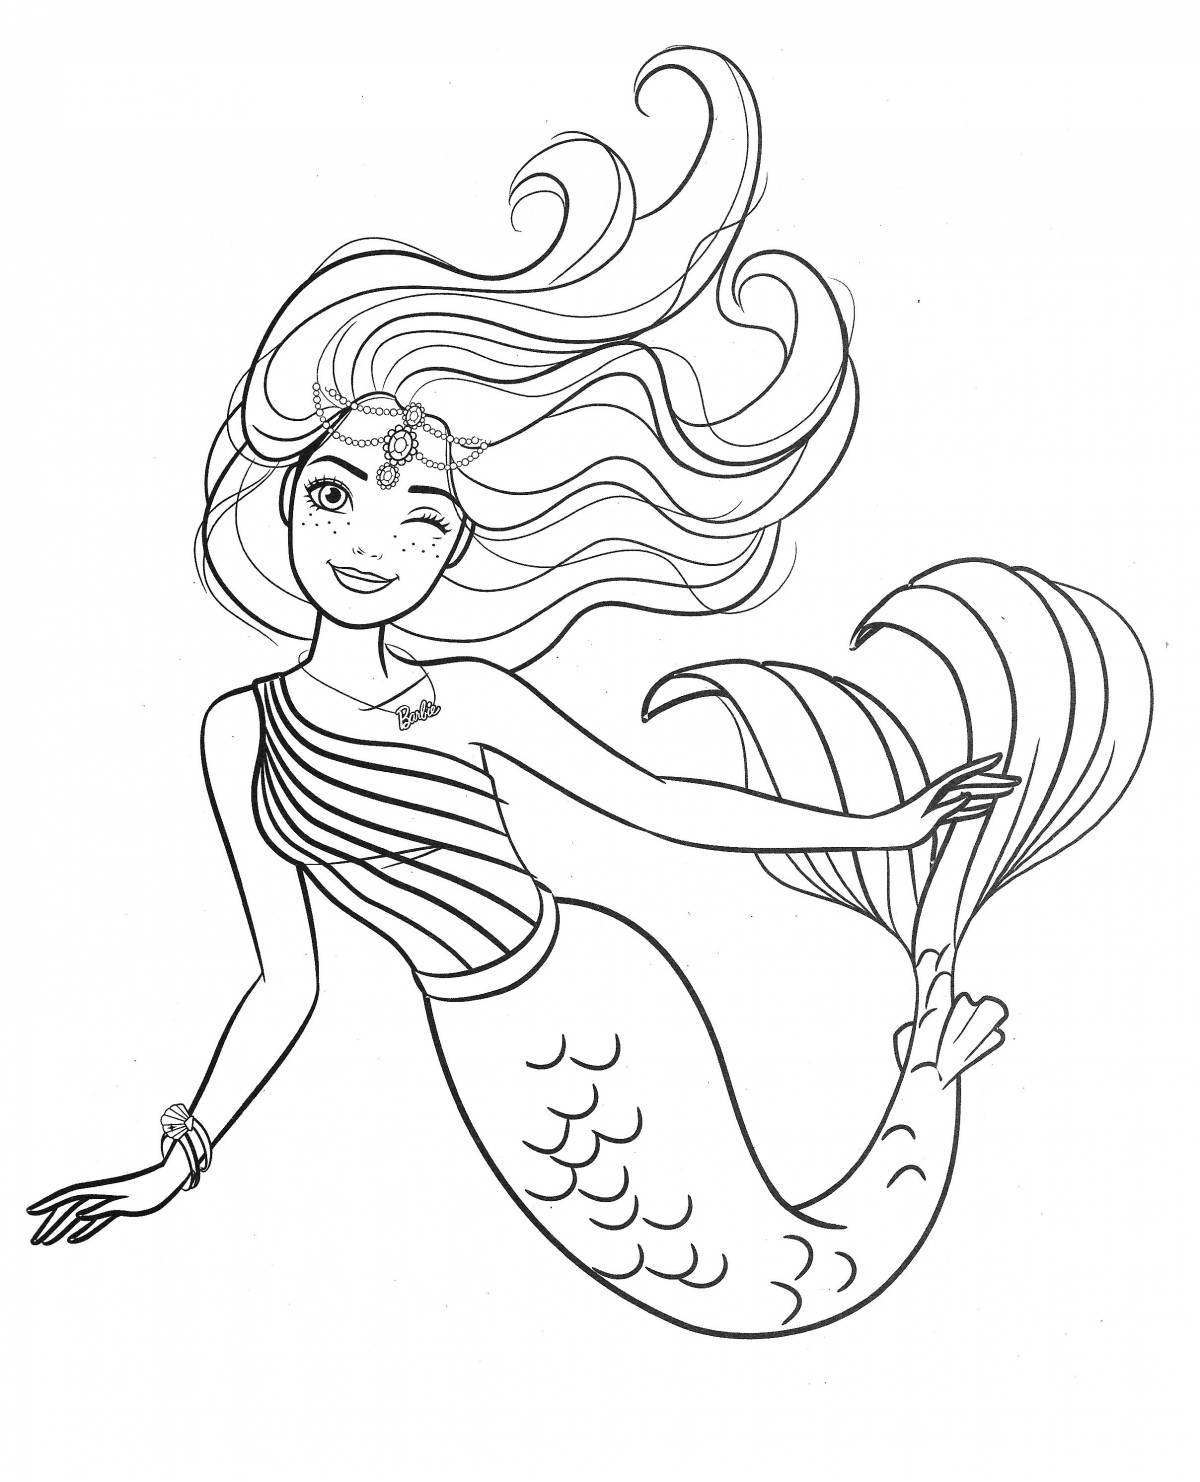 Exquisite mermaid queen coloring page